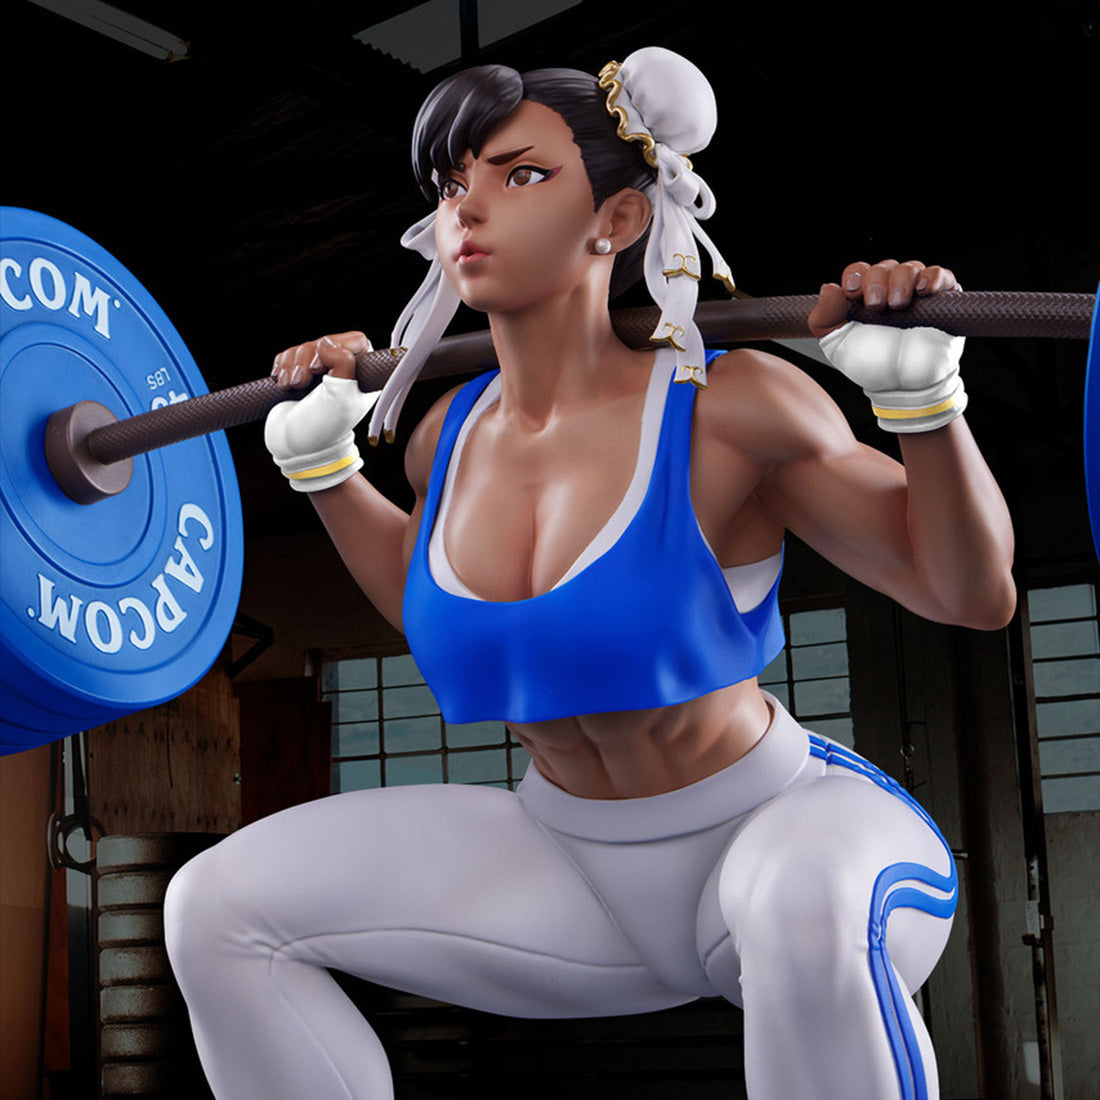 [LIMITED PO] Premium Collectibles Studio - Street Fighter - Chun-Li Classic Powerlifting (1/4 Statue) - Marvelous Toys